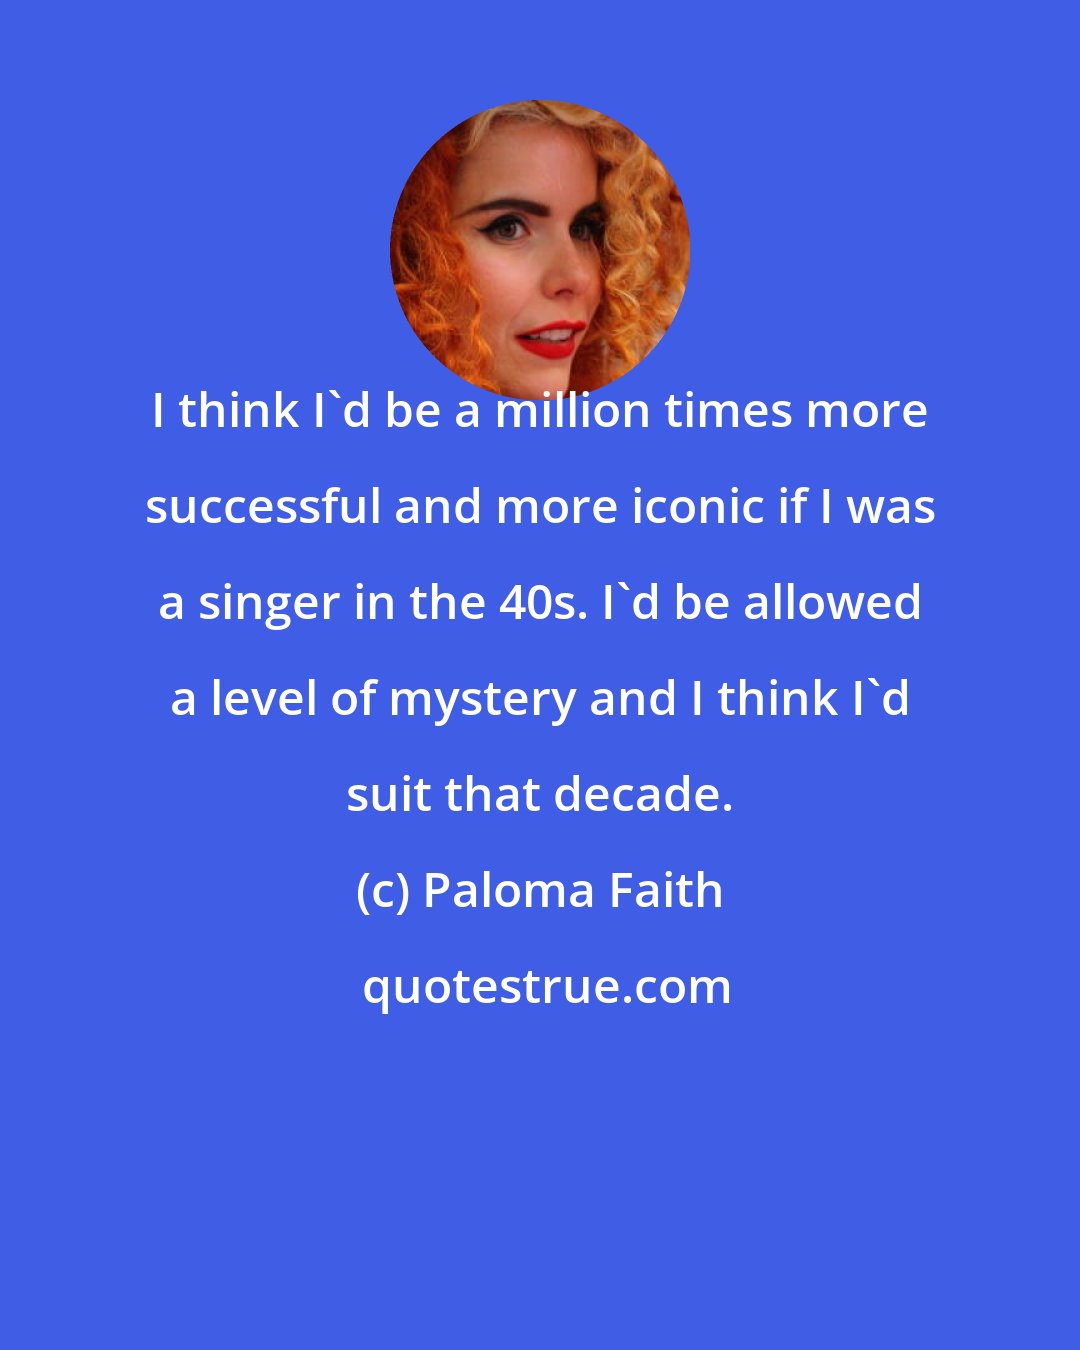 Paloma Faith: I think I'd be a million times more successful and more iconic if I was a singer in the 40s. I'd be allowed a level of mystery and I think I'd suit that decade.